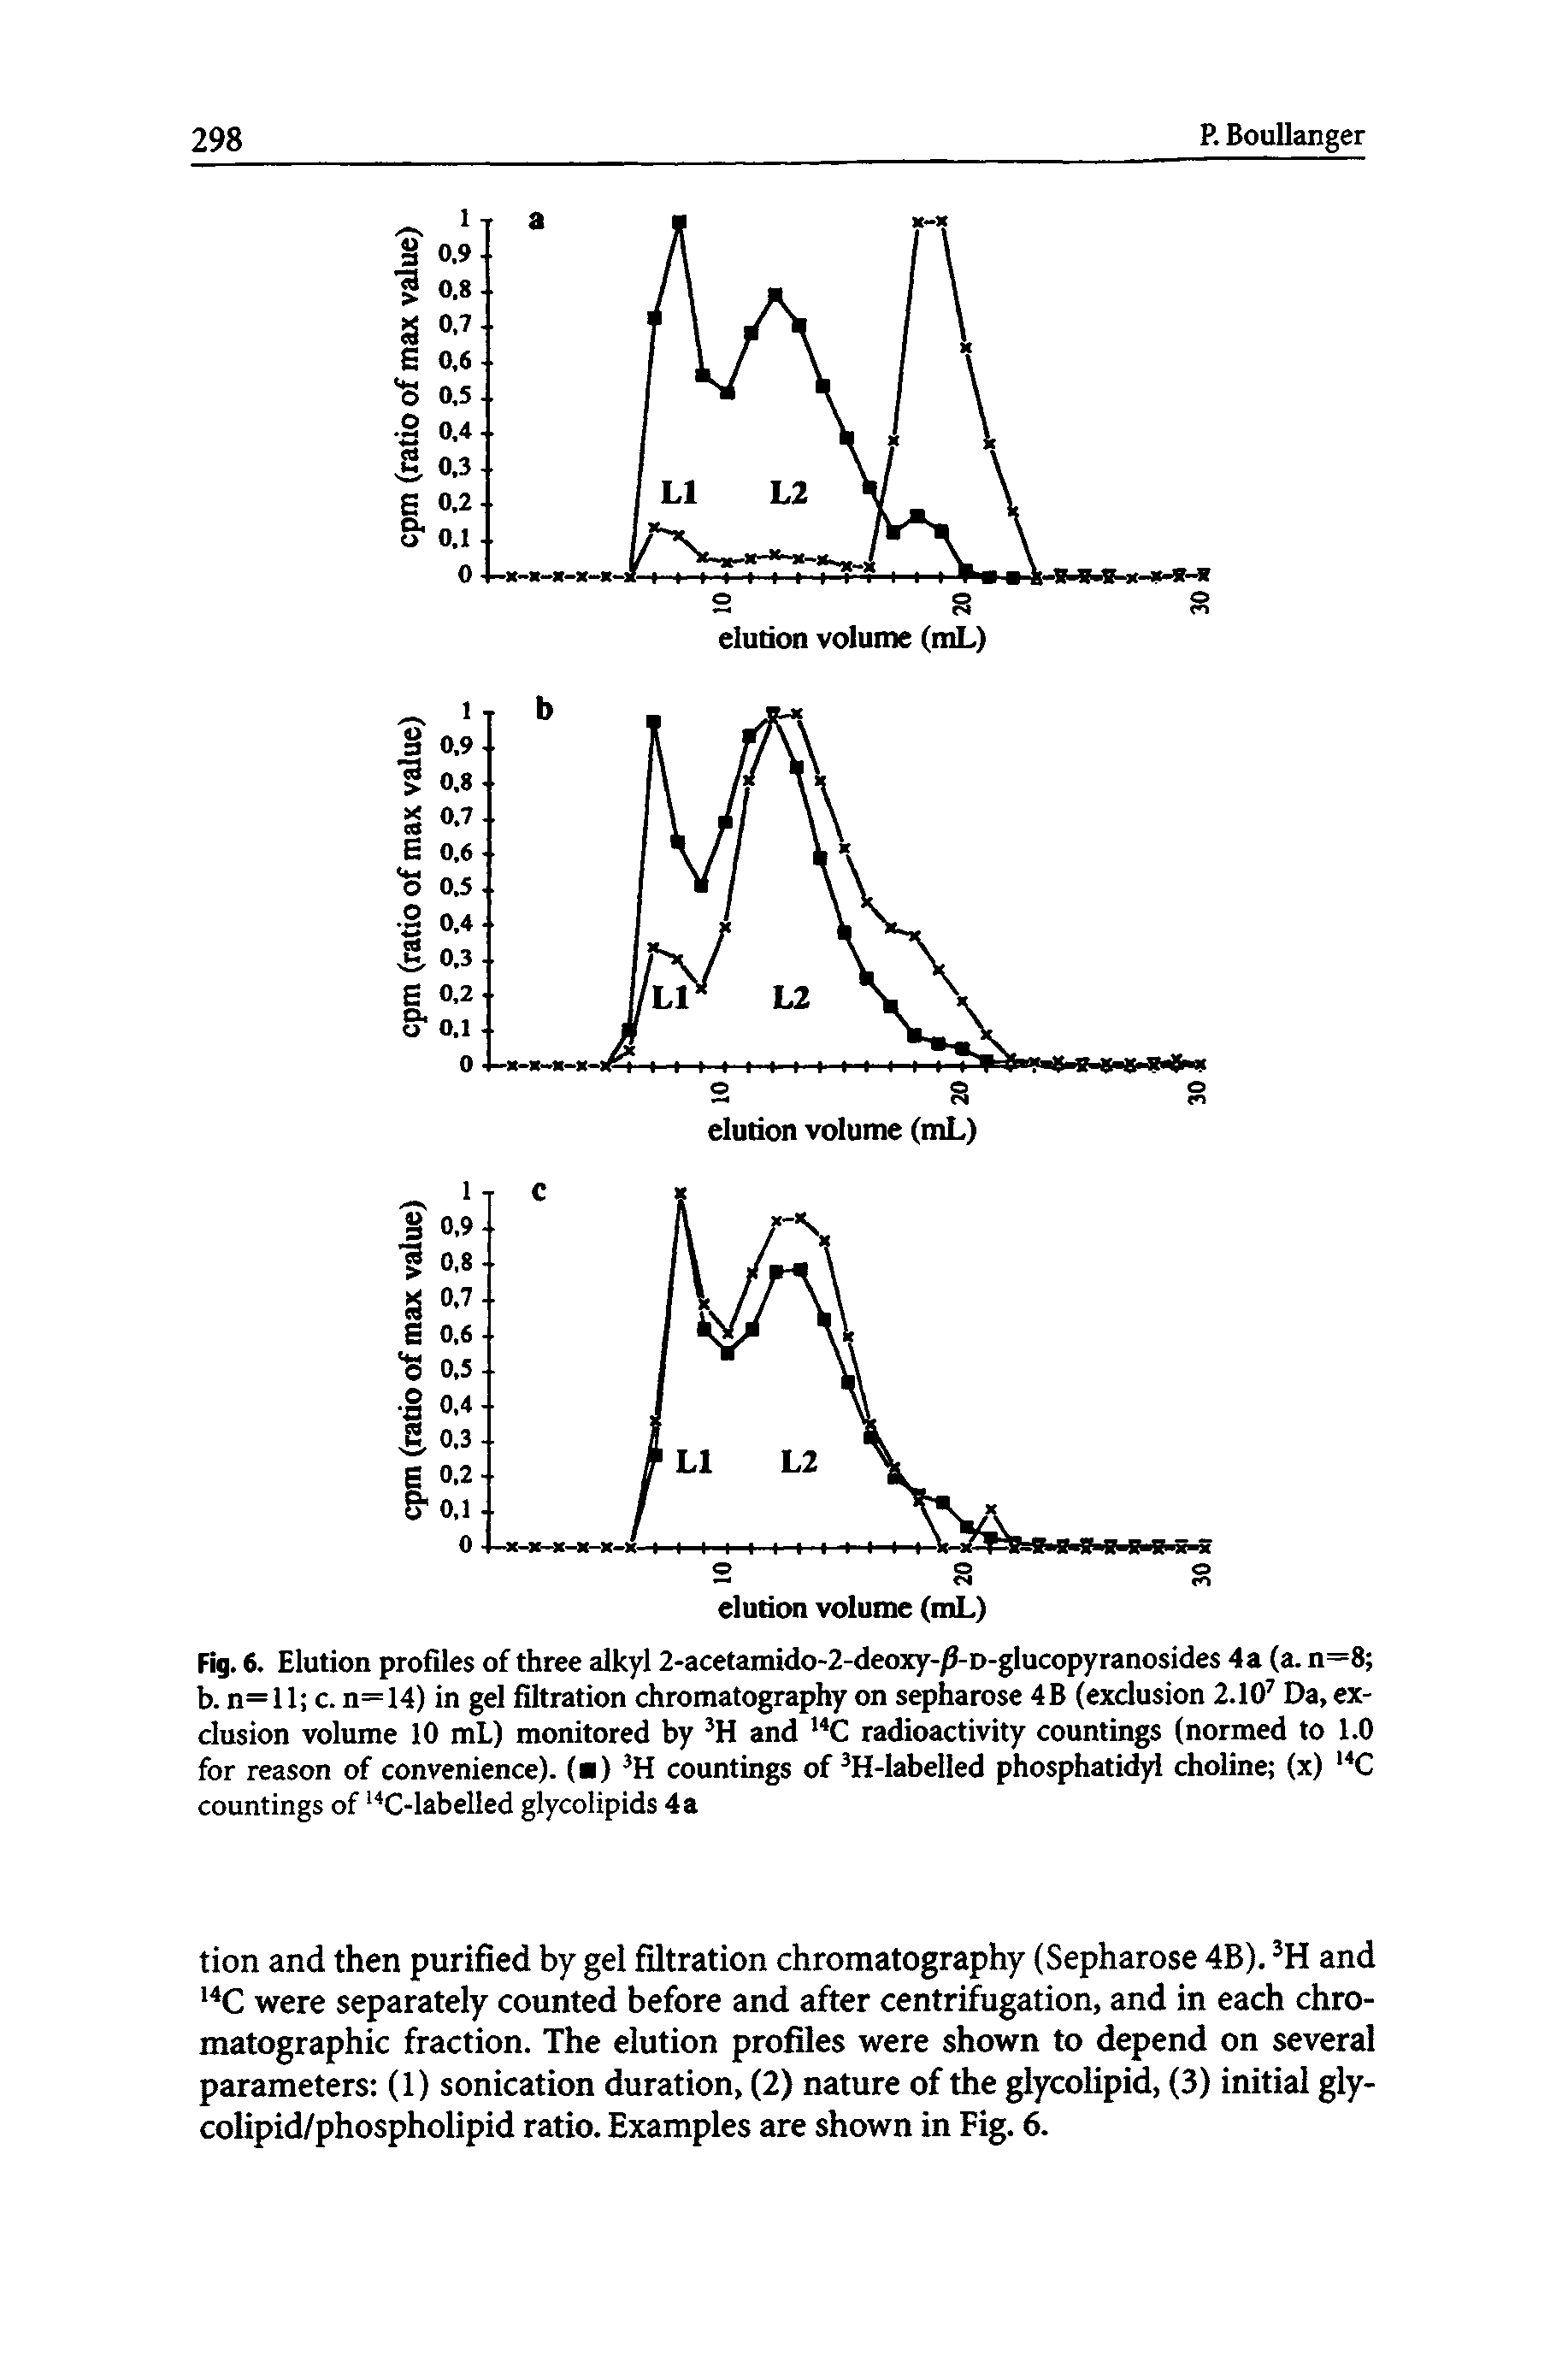 Fig. 6. Elution profiles of three alkyl 2-acetamido-2-deoxy- -D-glucopyranosides 4a (a. n=8 b. n=ll c. n=14) in gel filtration chromatography on sepharose 4B (exclusion 2.10 Da, exclusion volume 10 mL) monitored by and radioactivity countings (normed to 1.0 for reason of convenience). ( ) H countings of H-labelled phosphatidyl choline (x) C...